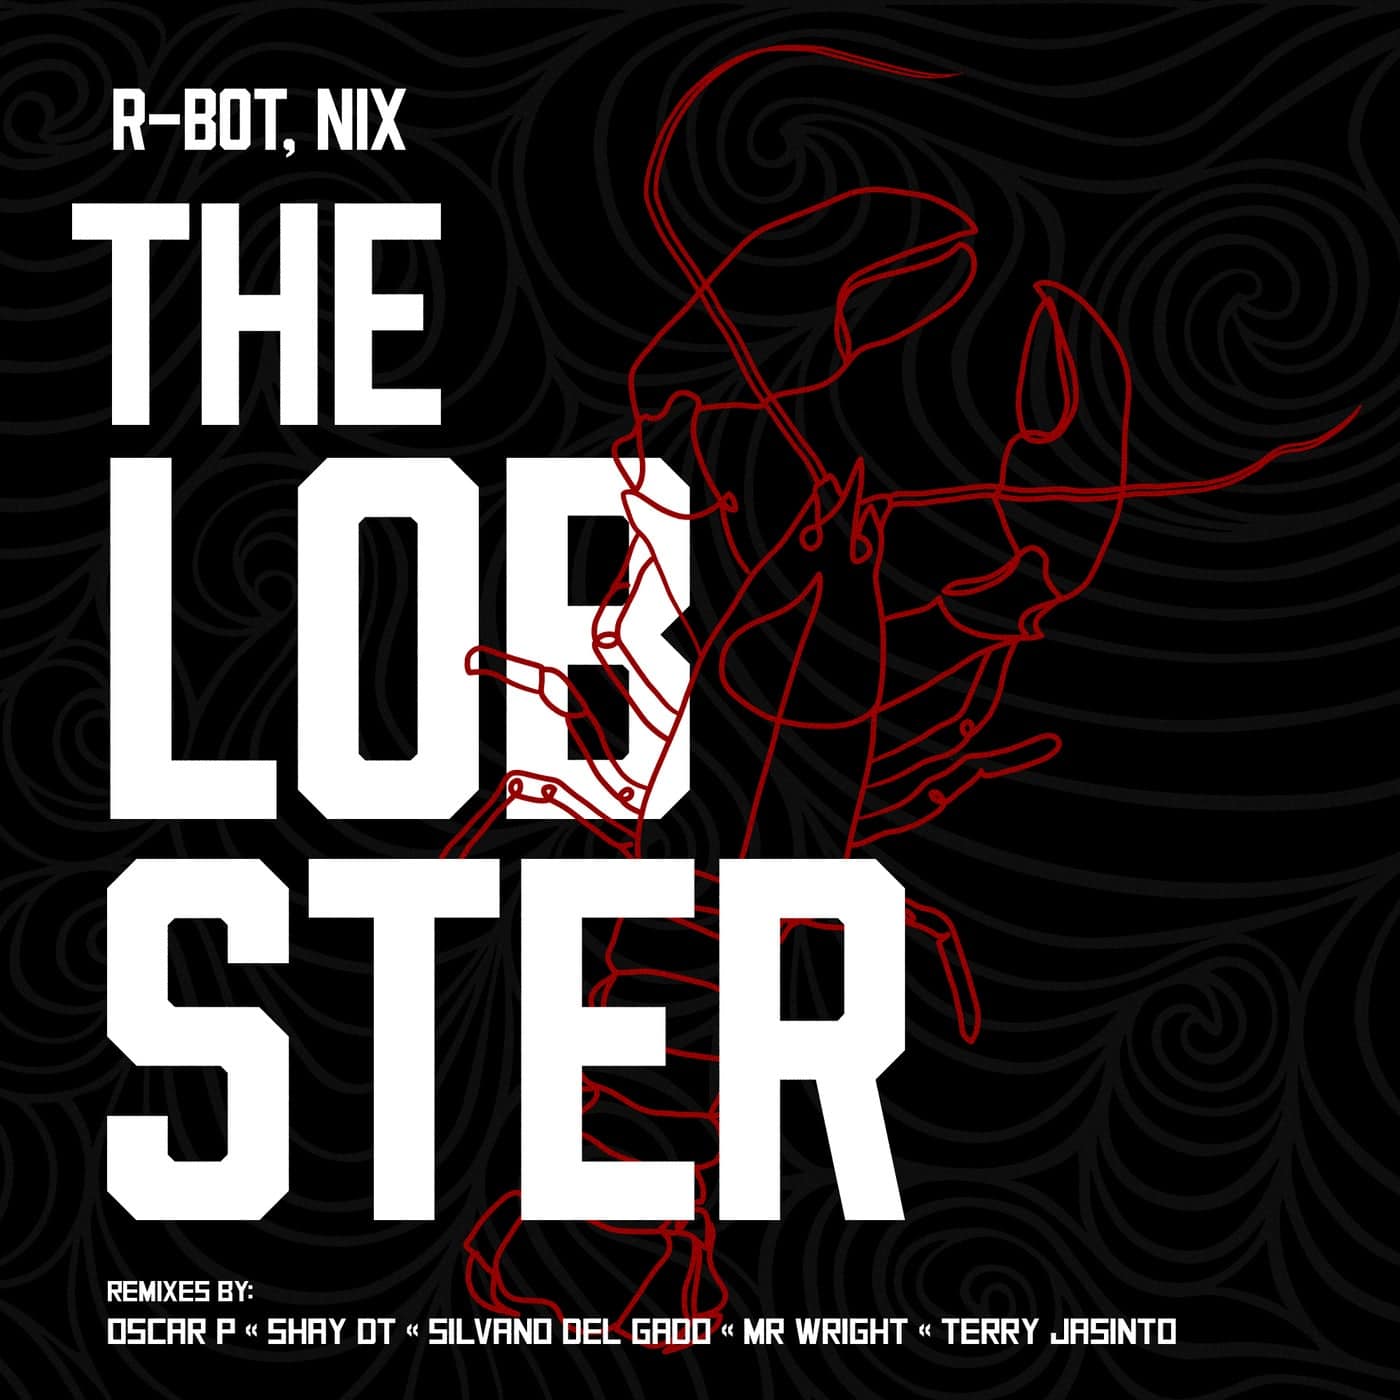 Download Nix, R-Bot - The Lobster on Electrobuzz